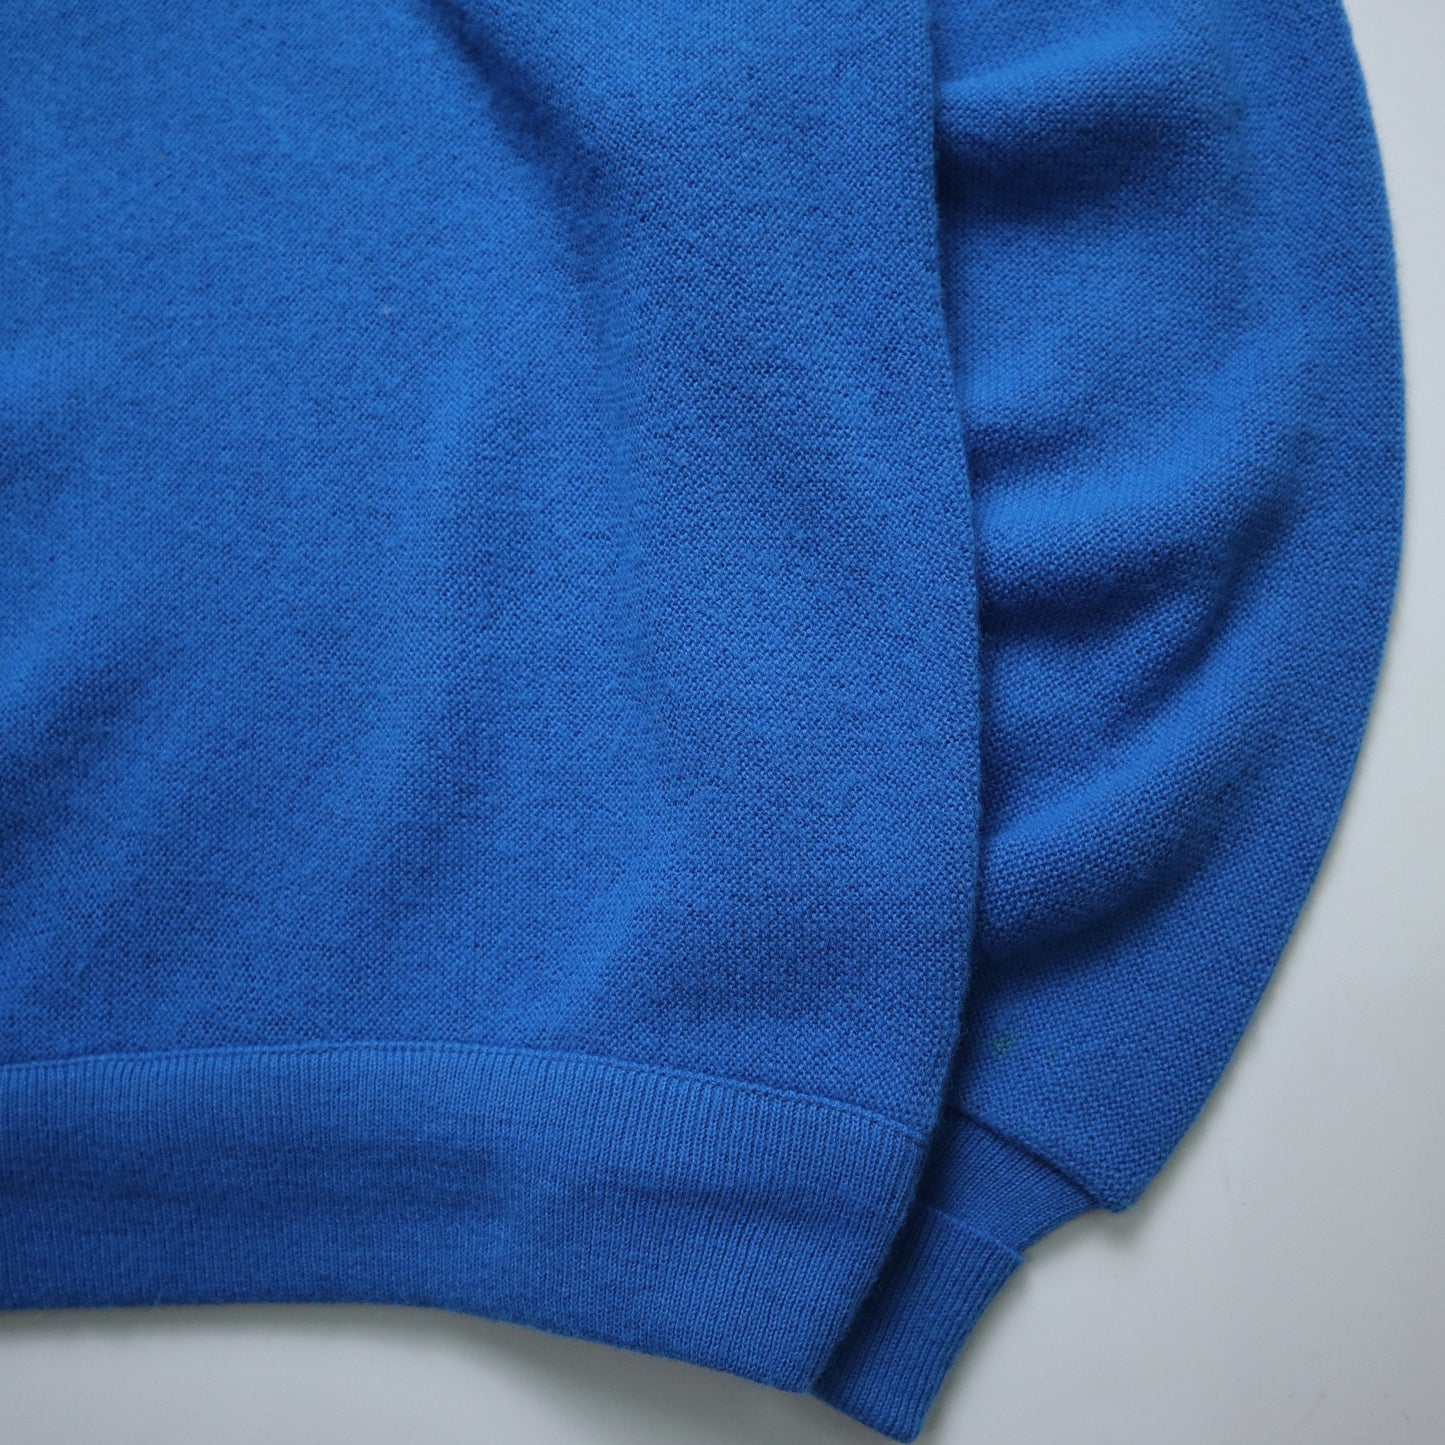 1980s Lacoste IZOD royal blue V-neck sweater made in the United States